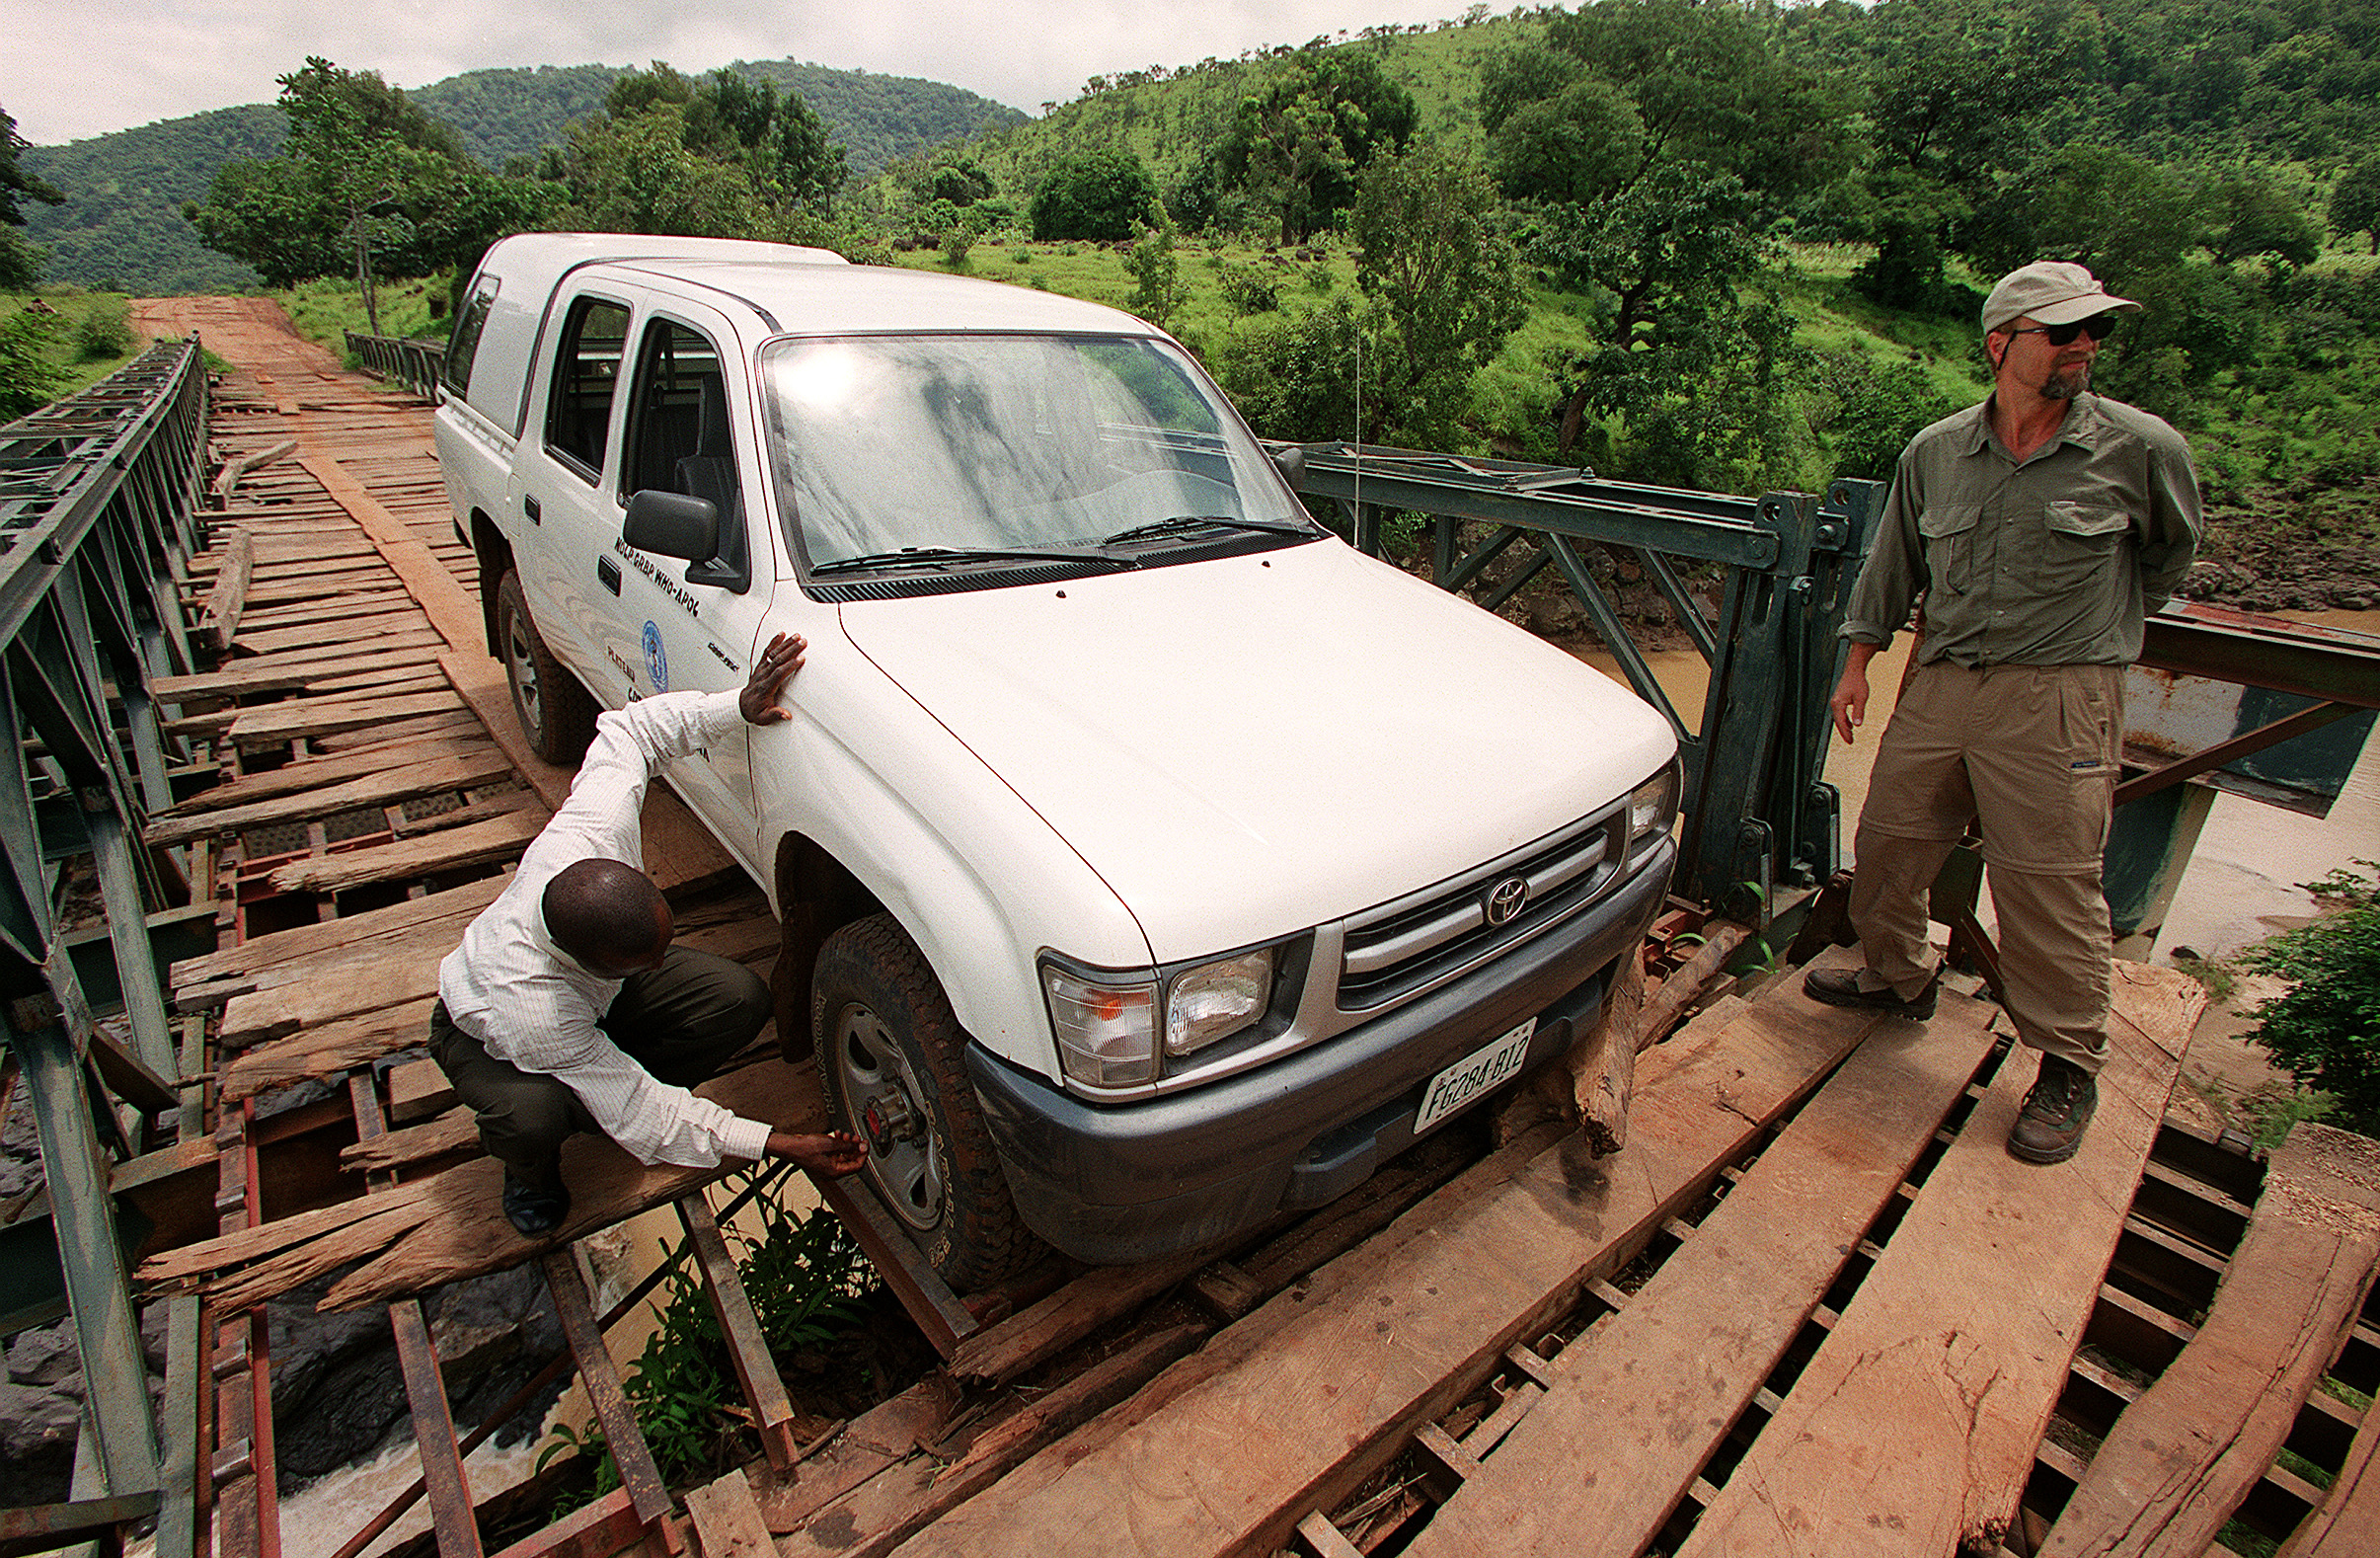 In 2001, Paulson traveled to Nigeria to report on the beginnings of the Bill and Melinda Gates Foundation’s work on global health. Paulson says the planking broke on this bridge outside Jos, Nigeria, and the driver inspected the tires because the truck wouldn’t move. “We eventually enlisted some locals to help us lift it up and get going again,” Paulson says. (Photo: Mike Urban)